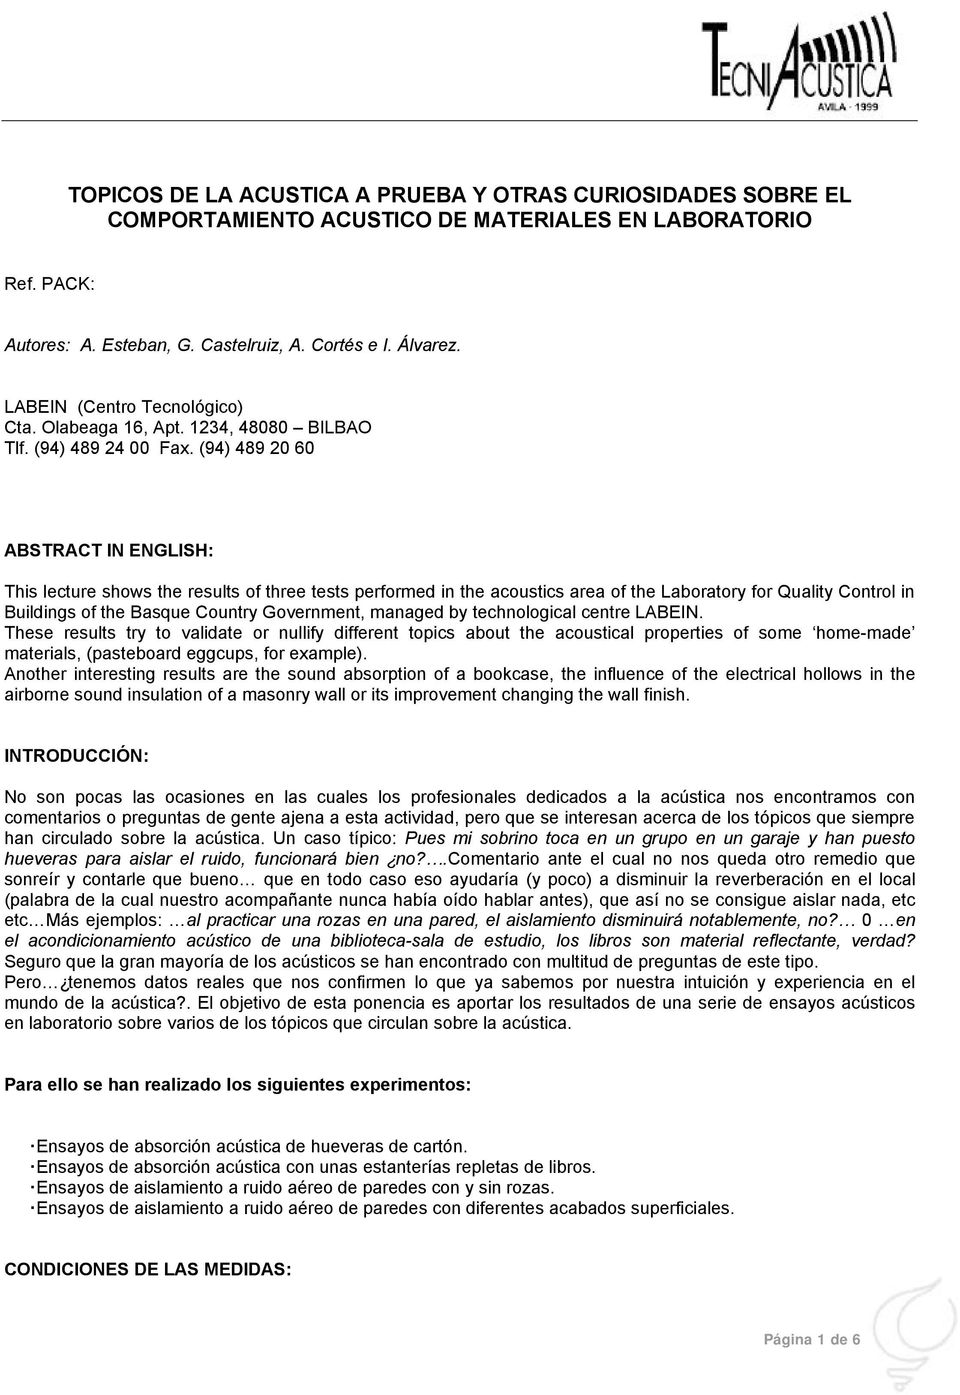 (94) 489 20 ABSTRACT IN ENGLISH: This lecture shows the results of three tests performed in the acoustics area of the Laboratory for Quality Control in Buildings of the Basque Country Government,